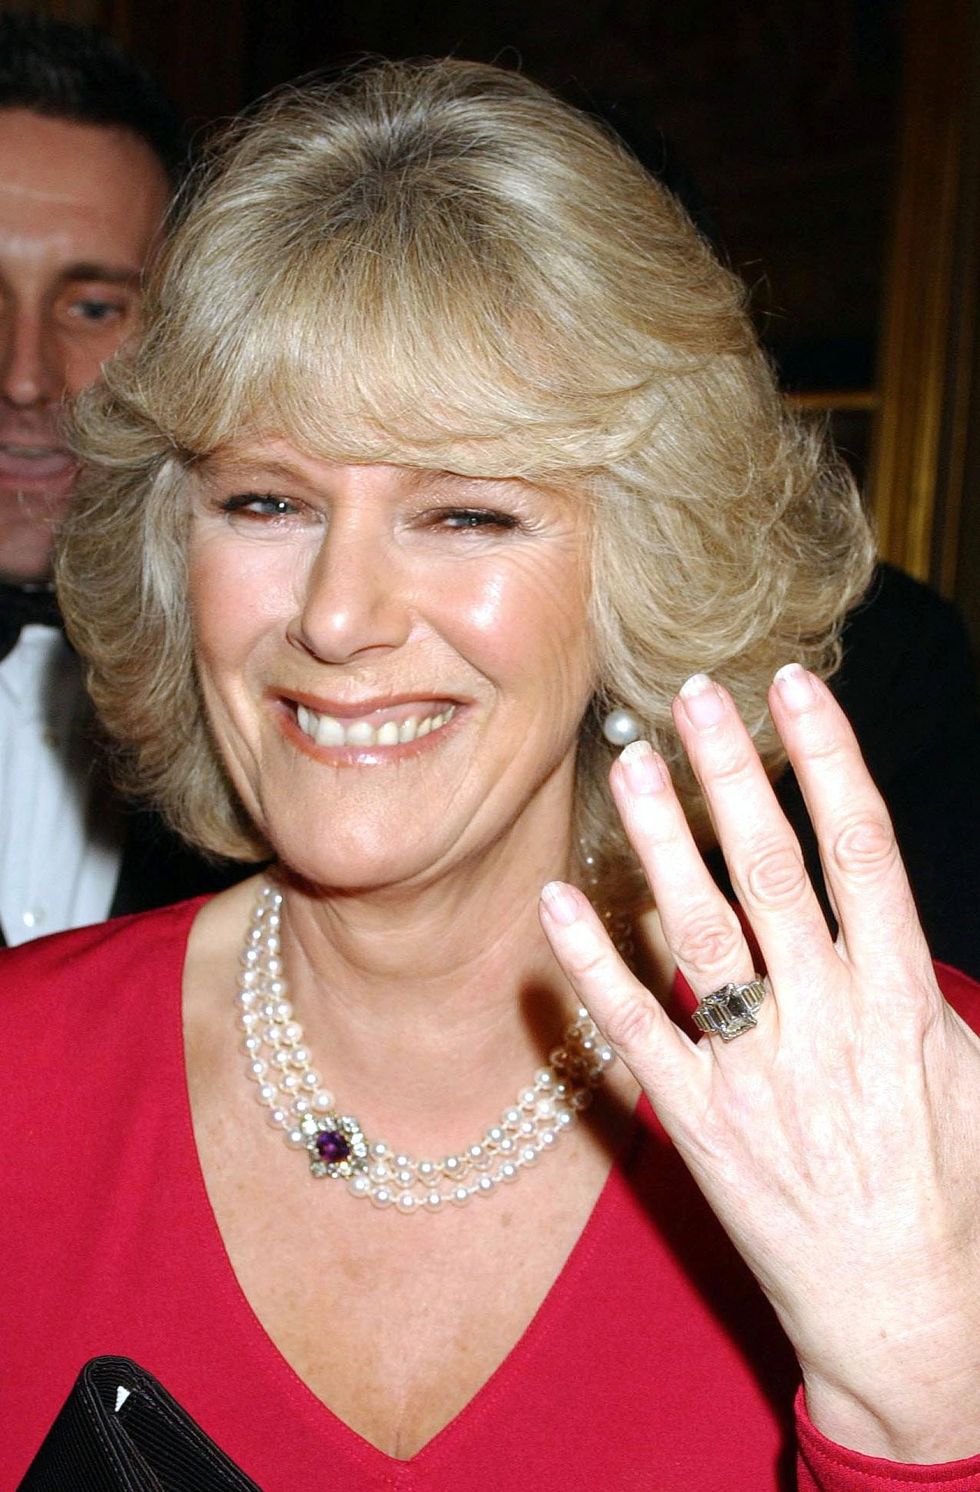 prince charles and camilla parker bowles announce their engagement februaury 10, 2005